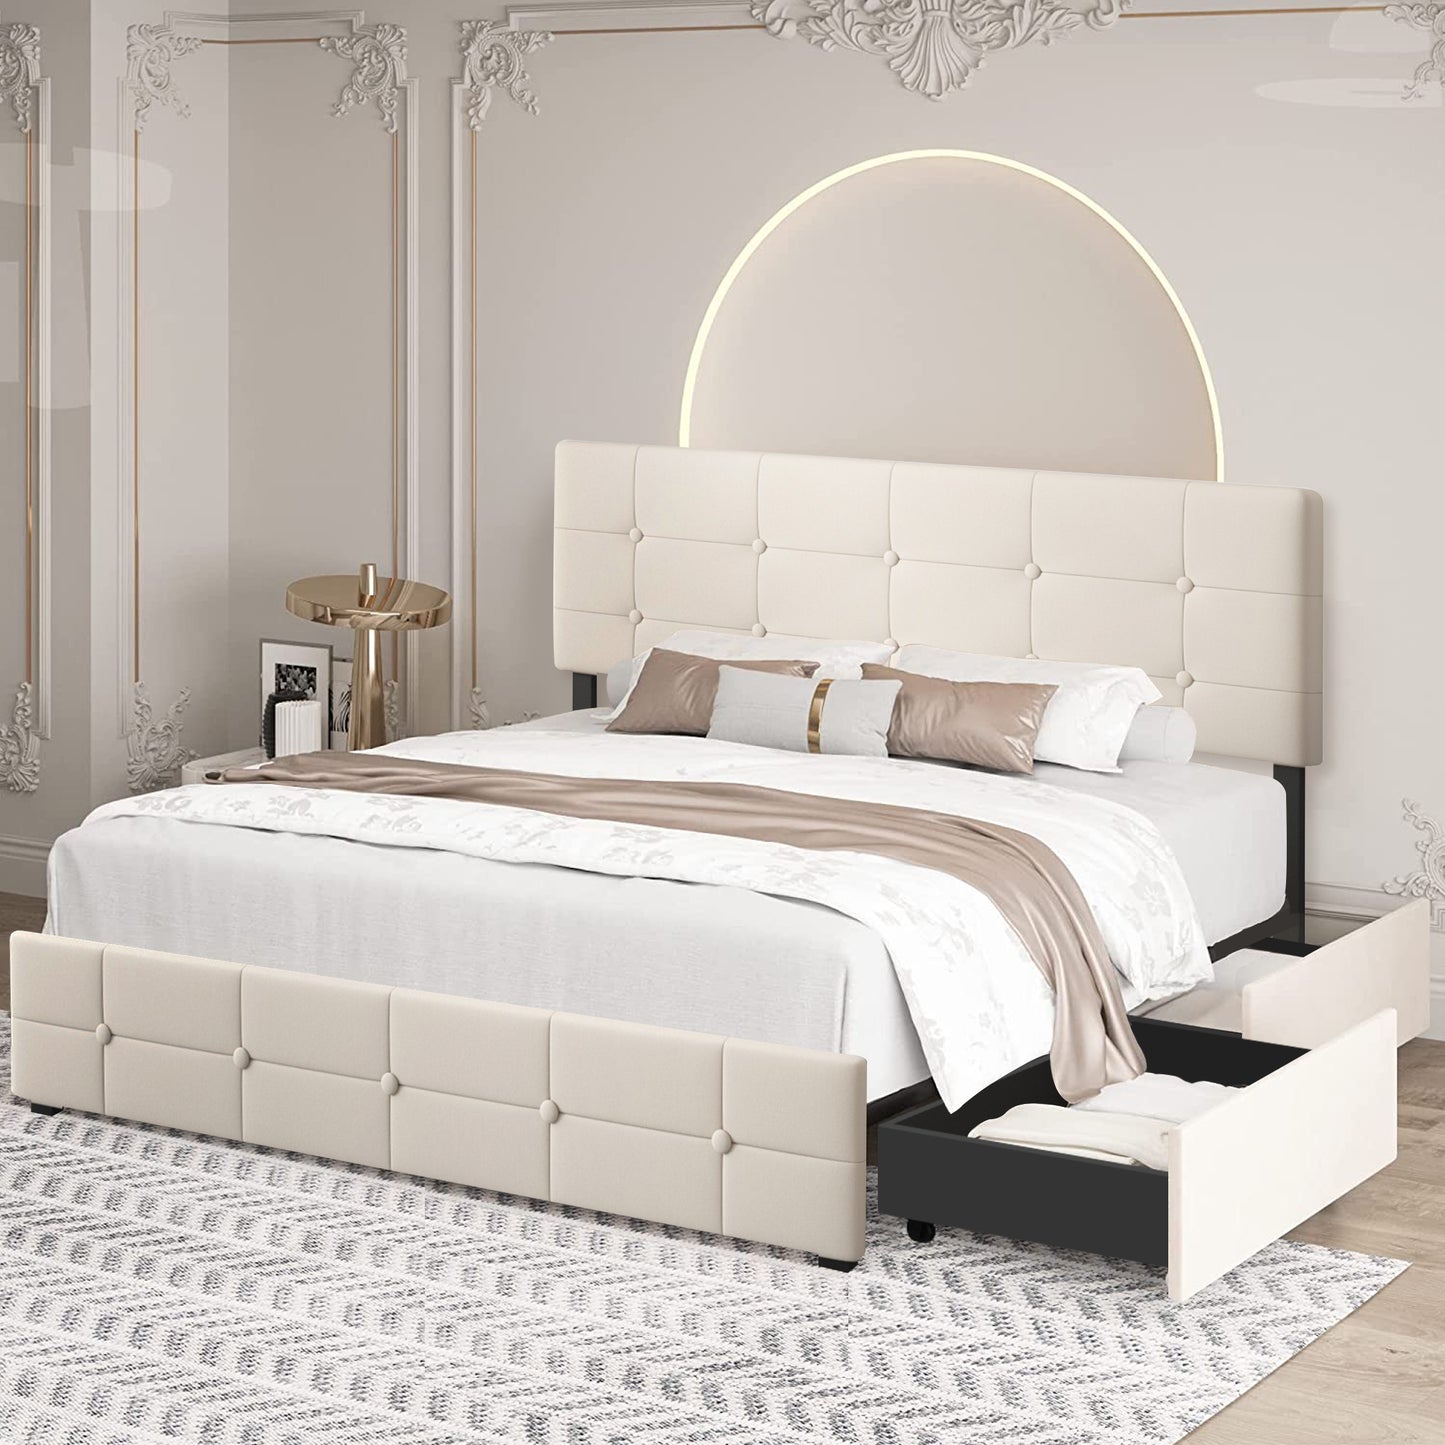 SYNGAR Storage Upholstered Queen Platform Bed Frame with 4 Drawers, Queen Size Storage Bed with Button Tufted Headboard, Metal Mattress Foundation with Strong Slats, No Box Spring Needed, Beige